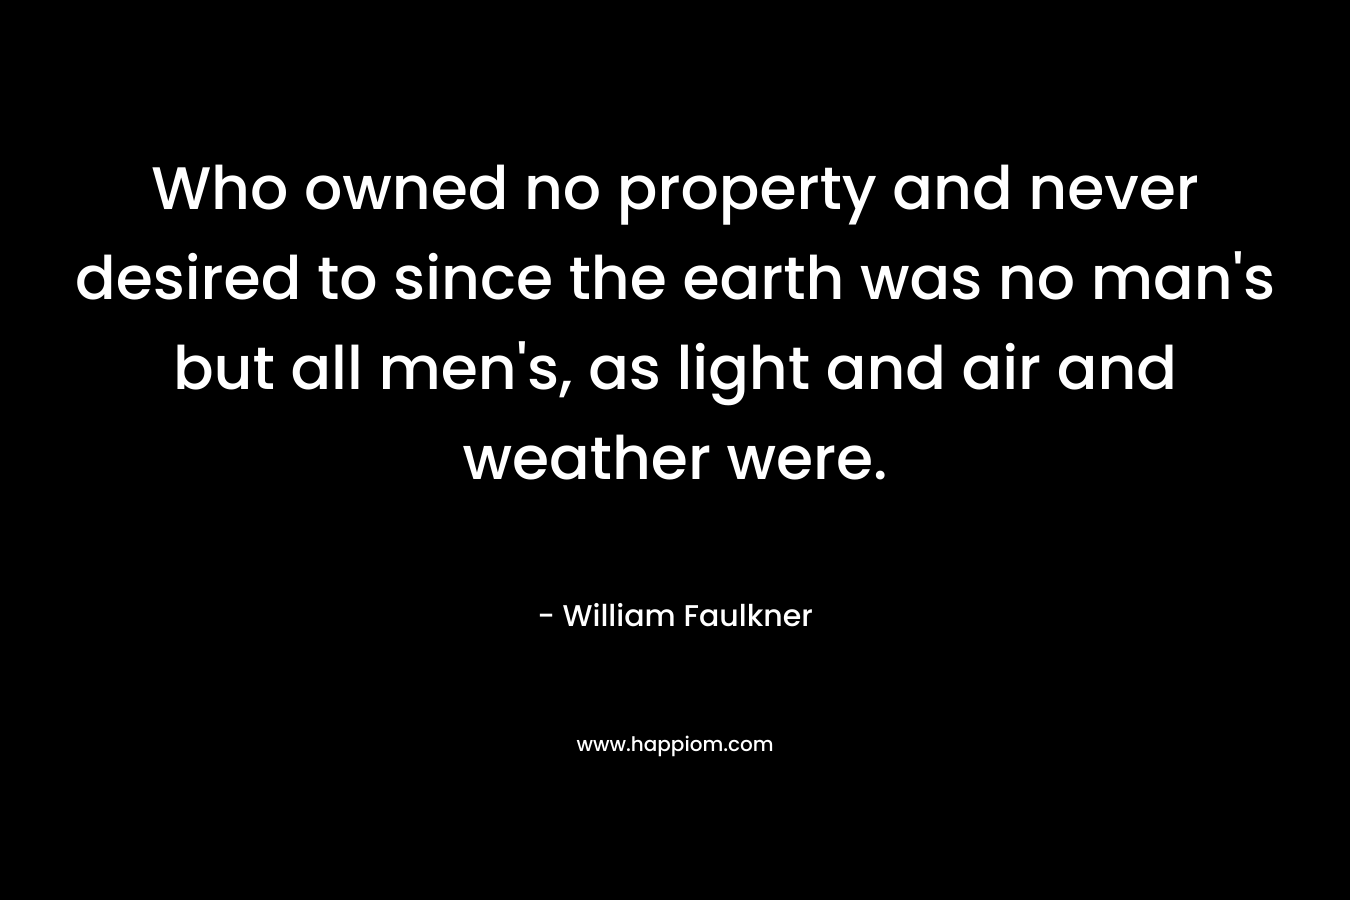 Who owned no property and never desired to since the earth was no man’s but all men’s, as light and air and weather were. – William Faulkner